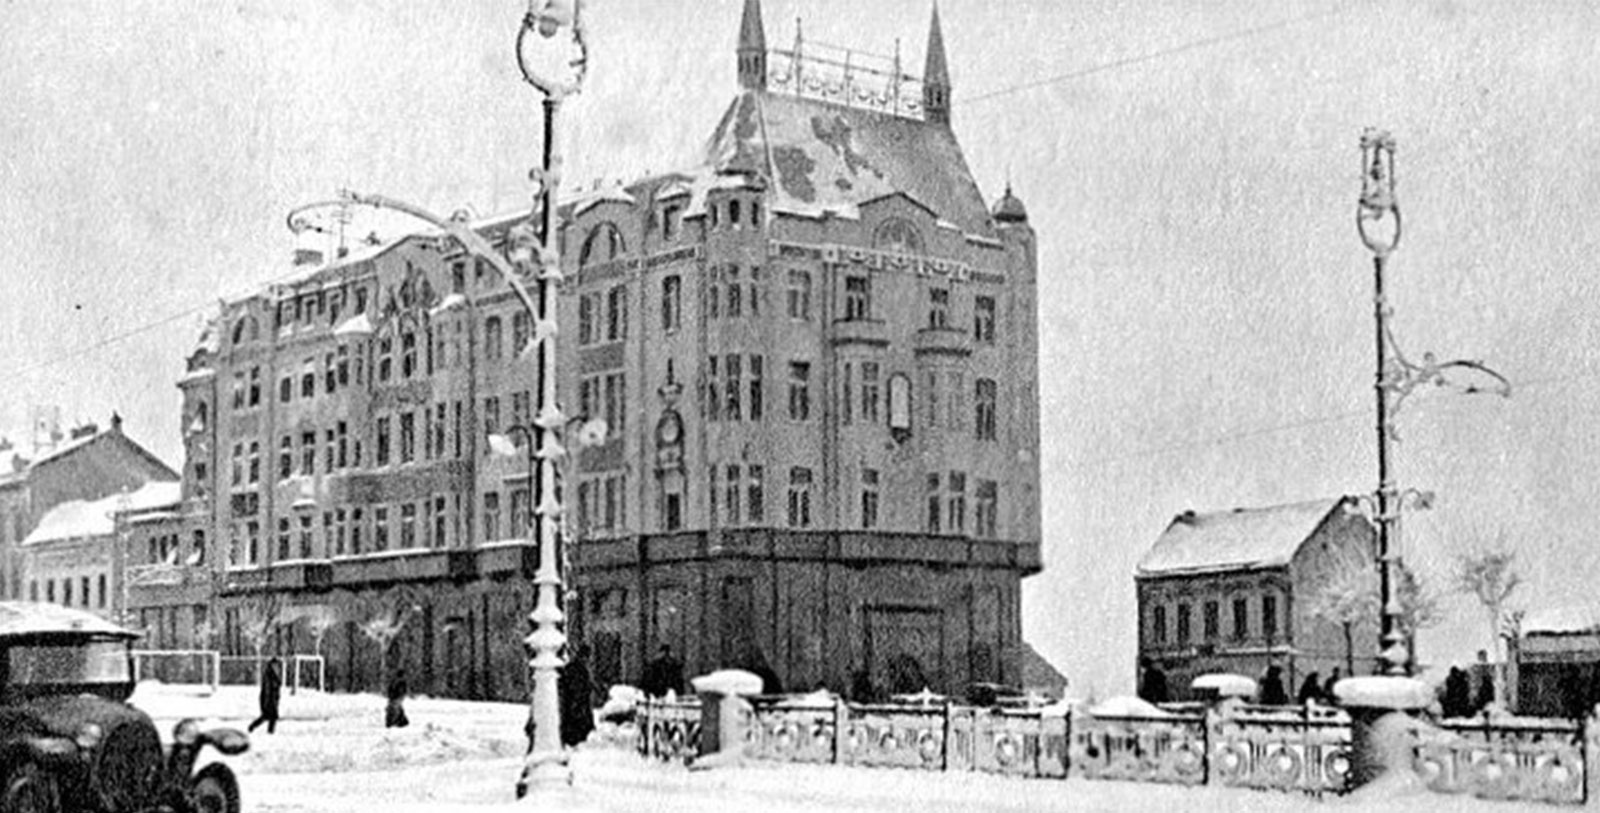 Discover the Russian Art Nouveau-style façade of the Hotel Moskva.